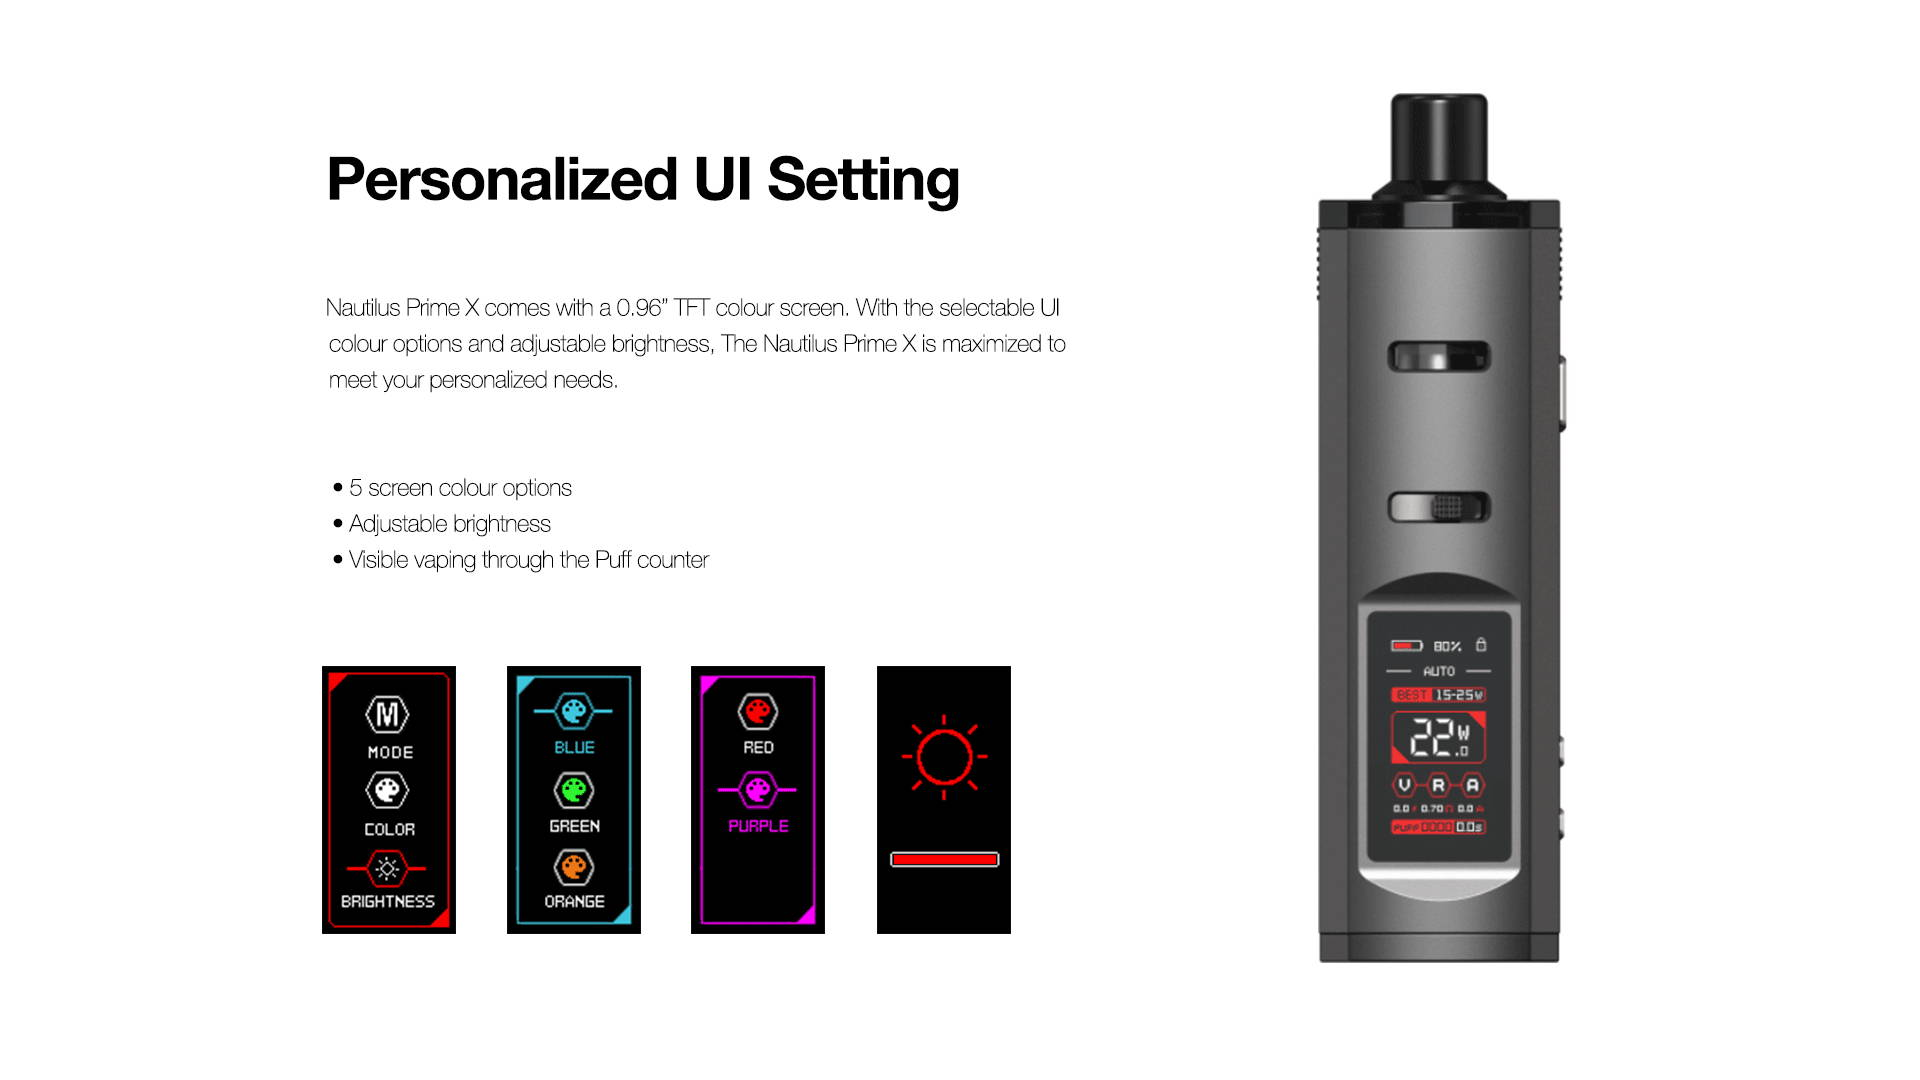 Personalized UI Setting  Nautilus Prime X comes with a 0.96” TFT color screen. With the selectable UI color options and adjustable brightness, maximized to meet your personalized needs.       5 screen color options     Brightness adjustable     Visible vaping habit through the Puff counter